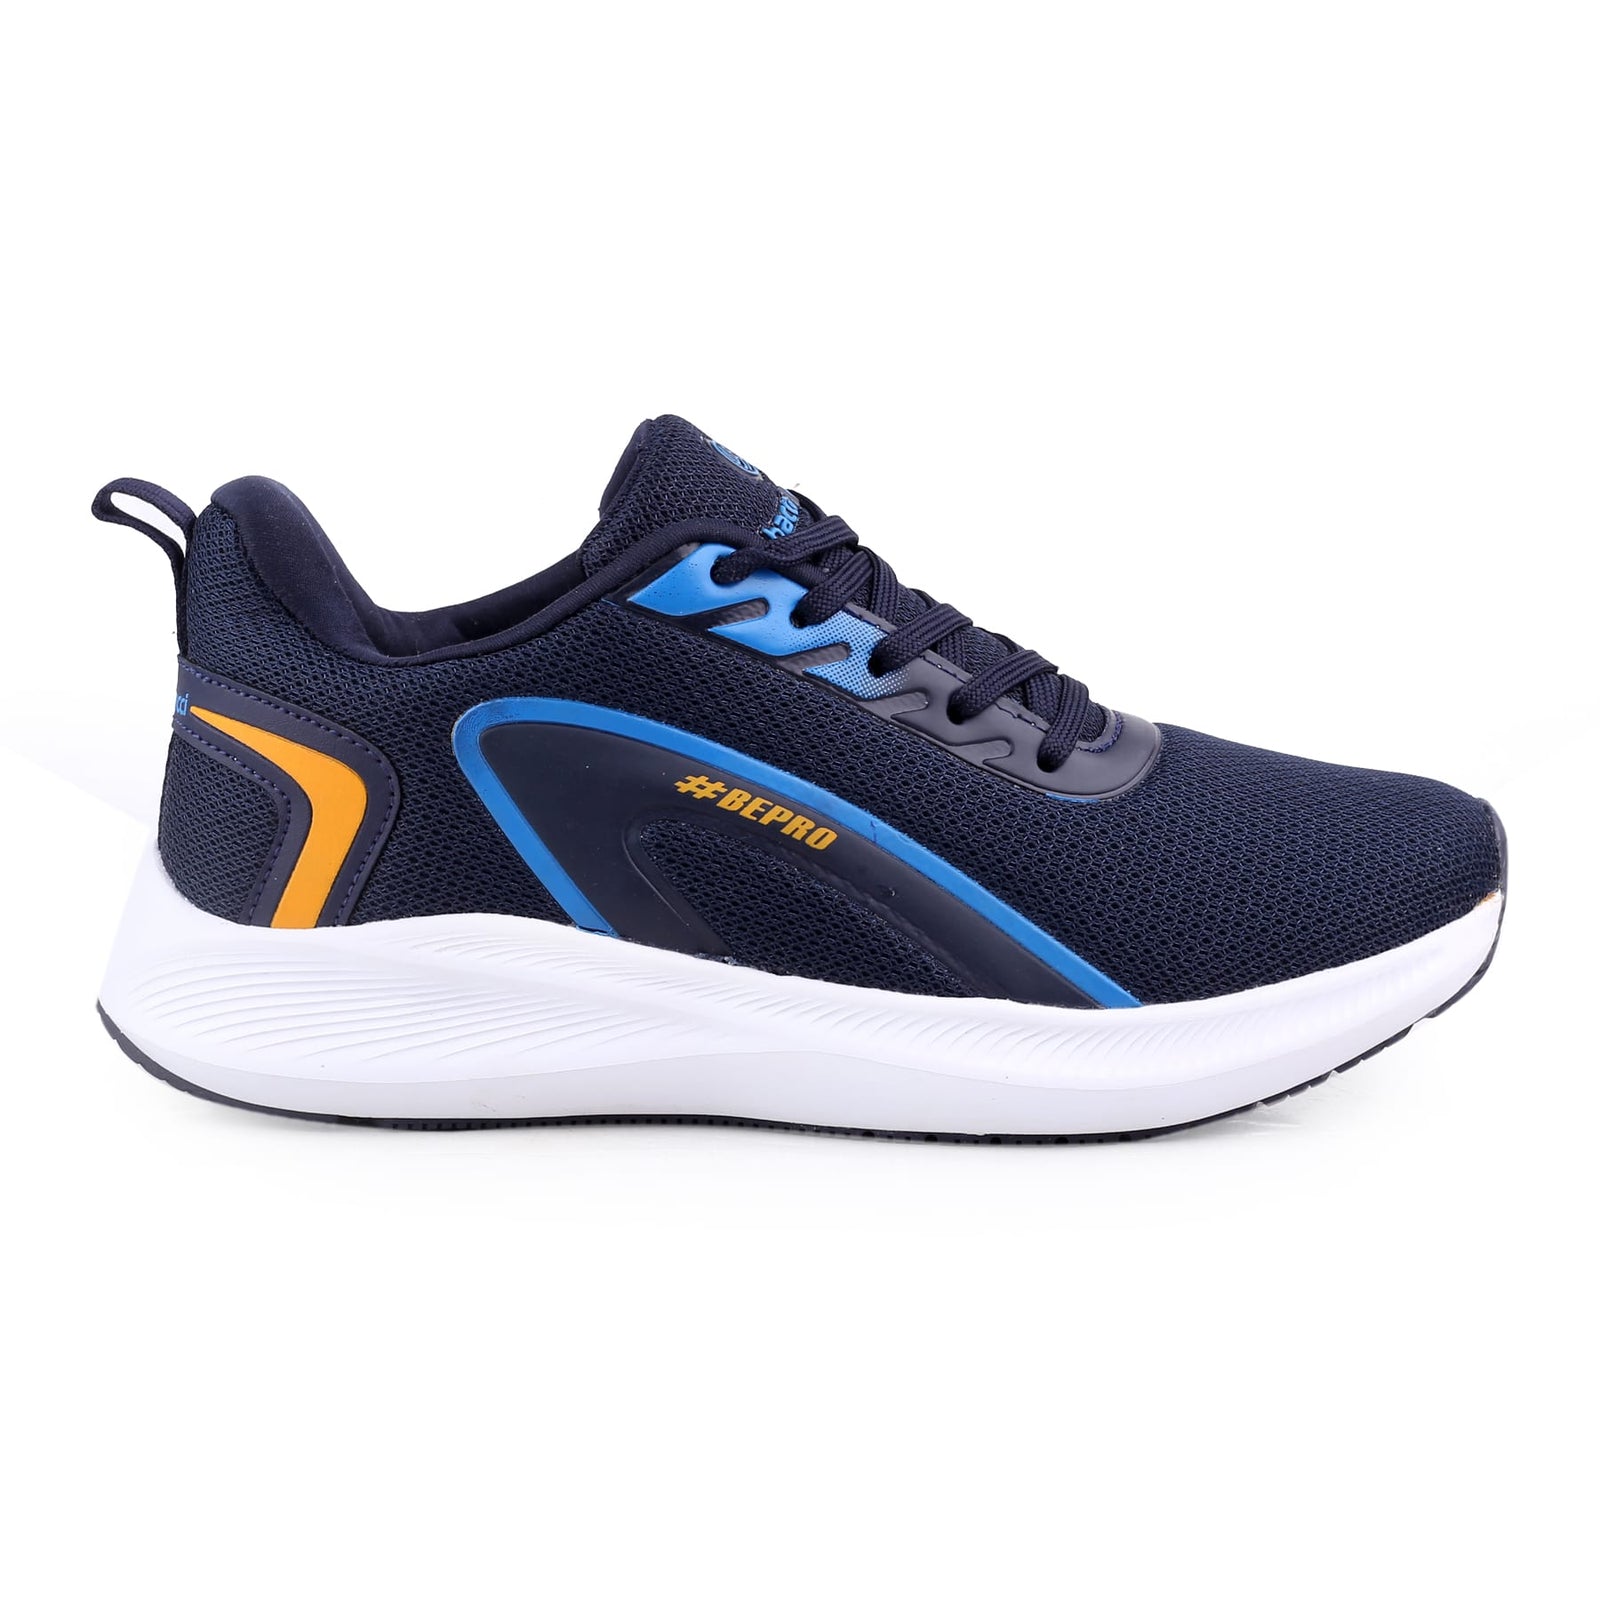 Bacca Bucci Essential All Purpose Walking Running Casual Shoes for Men